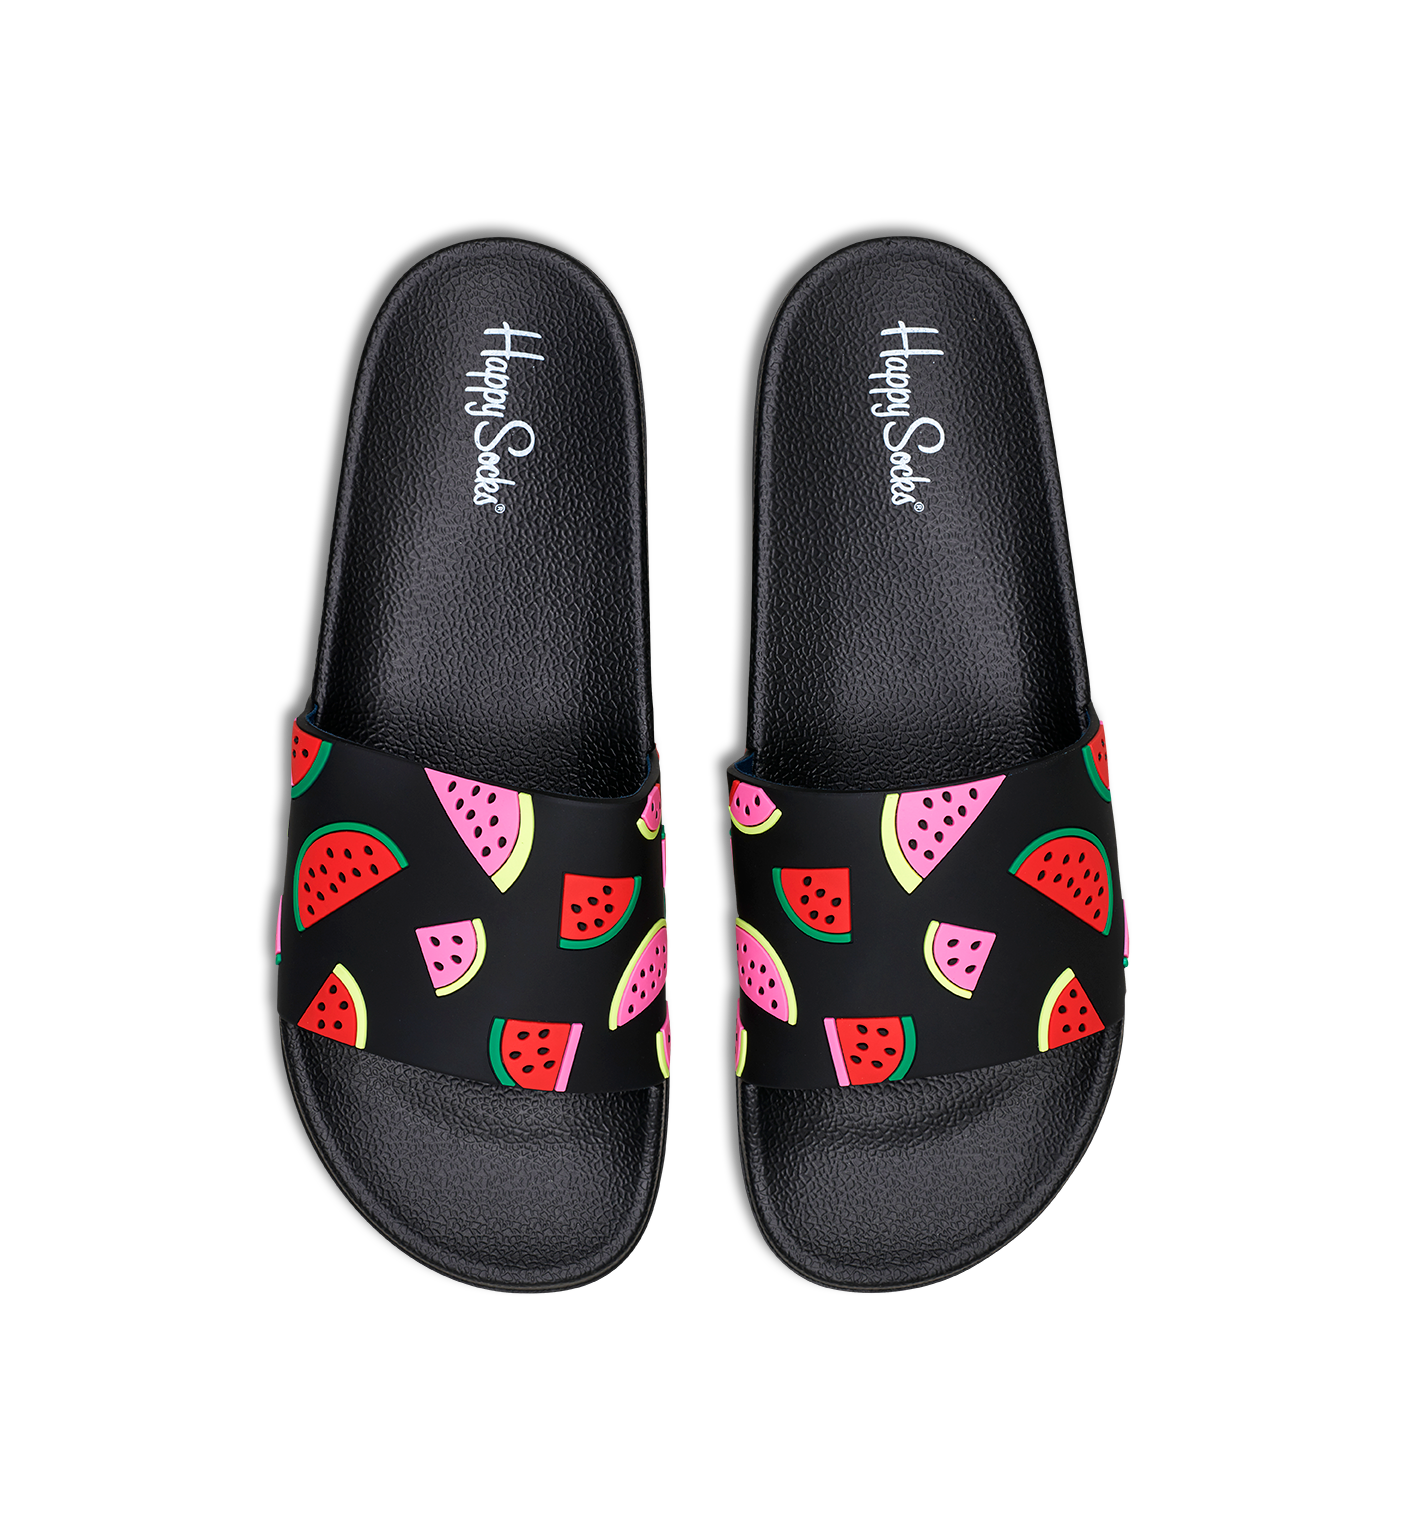 Colorful Pool Shoes: Watermelon | Happy Socks